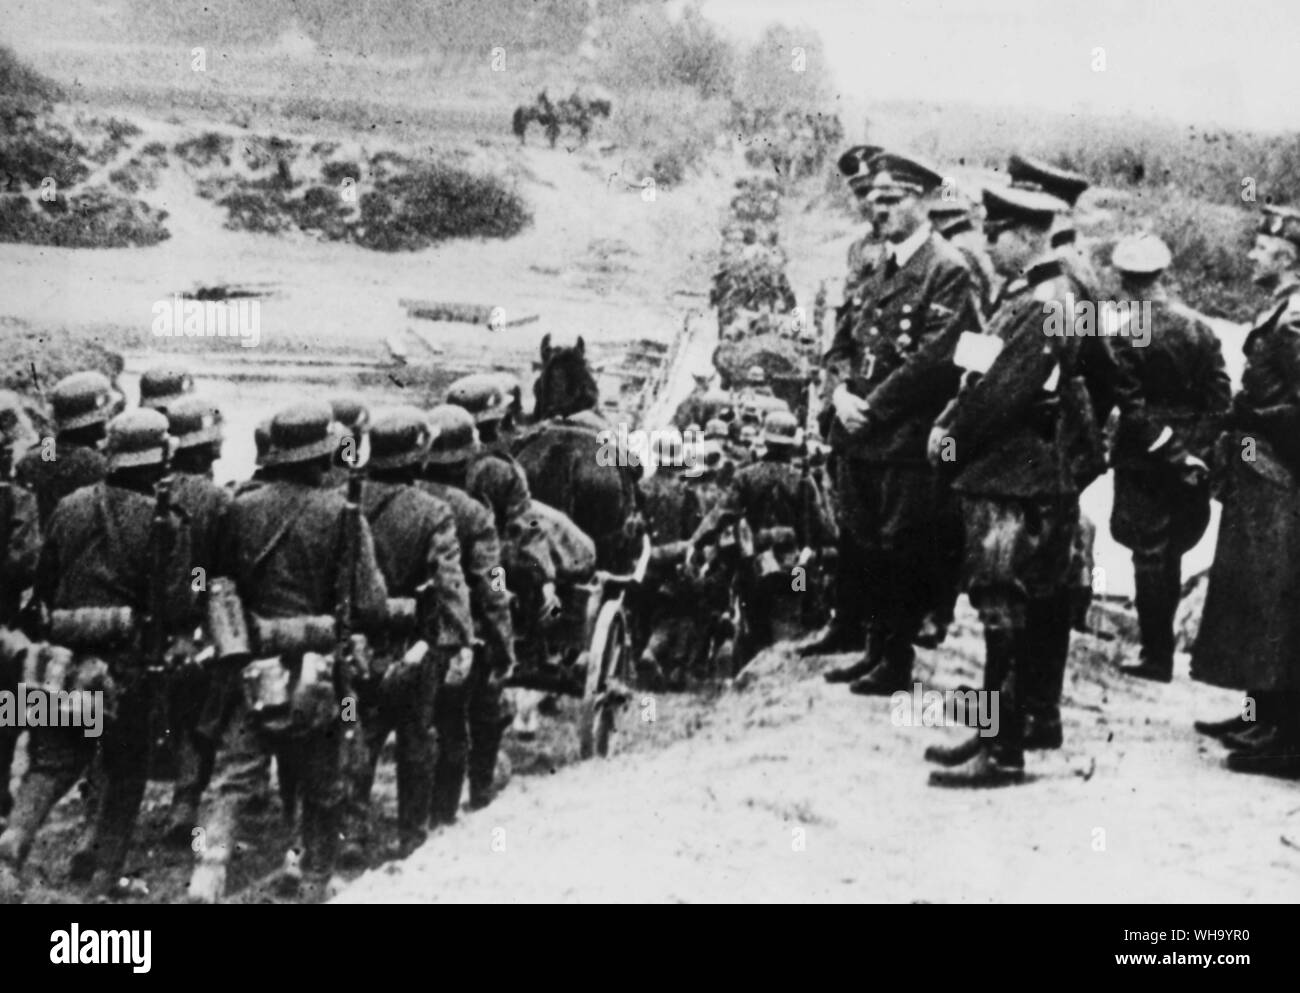 WW2: Hitler and other high German officers watch the long lines of Nazi soldiers marching through the mud of Poland after Germany attacked Poland in the morning hours of 1st September 1939. Two days later England and France, to fulfill their pledge of assistance to Poland, declared war against the Nazi state and the European conflict was under way. Stock Photo